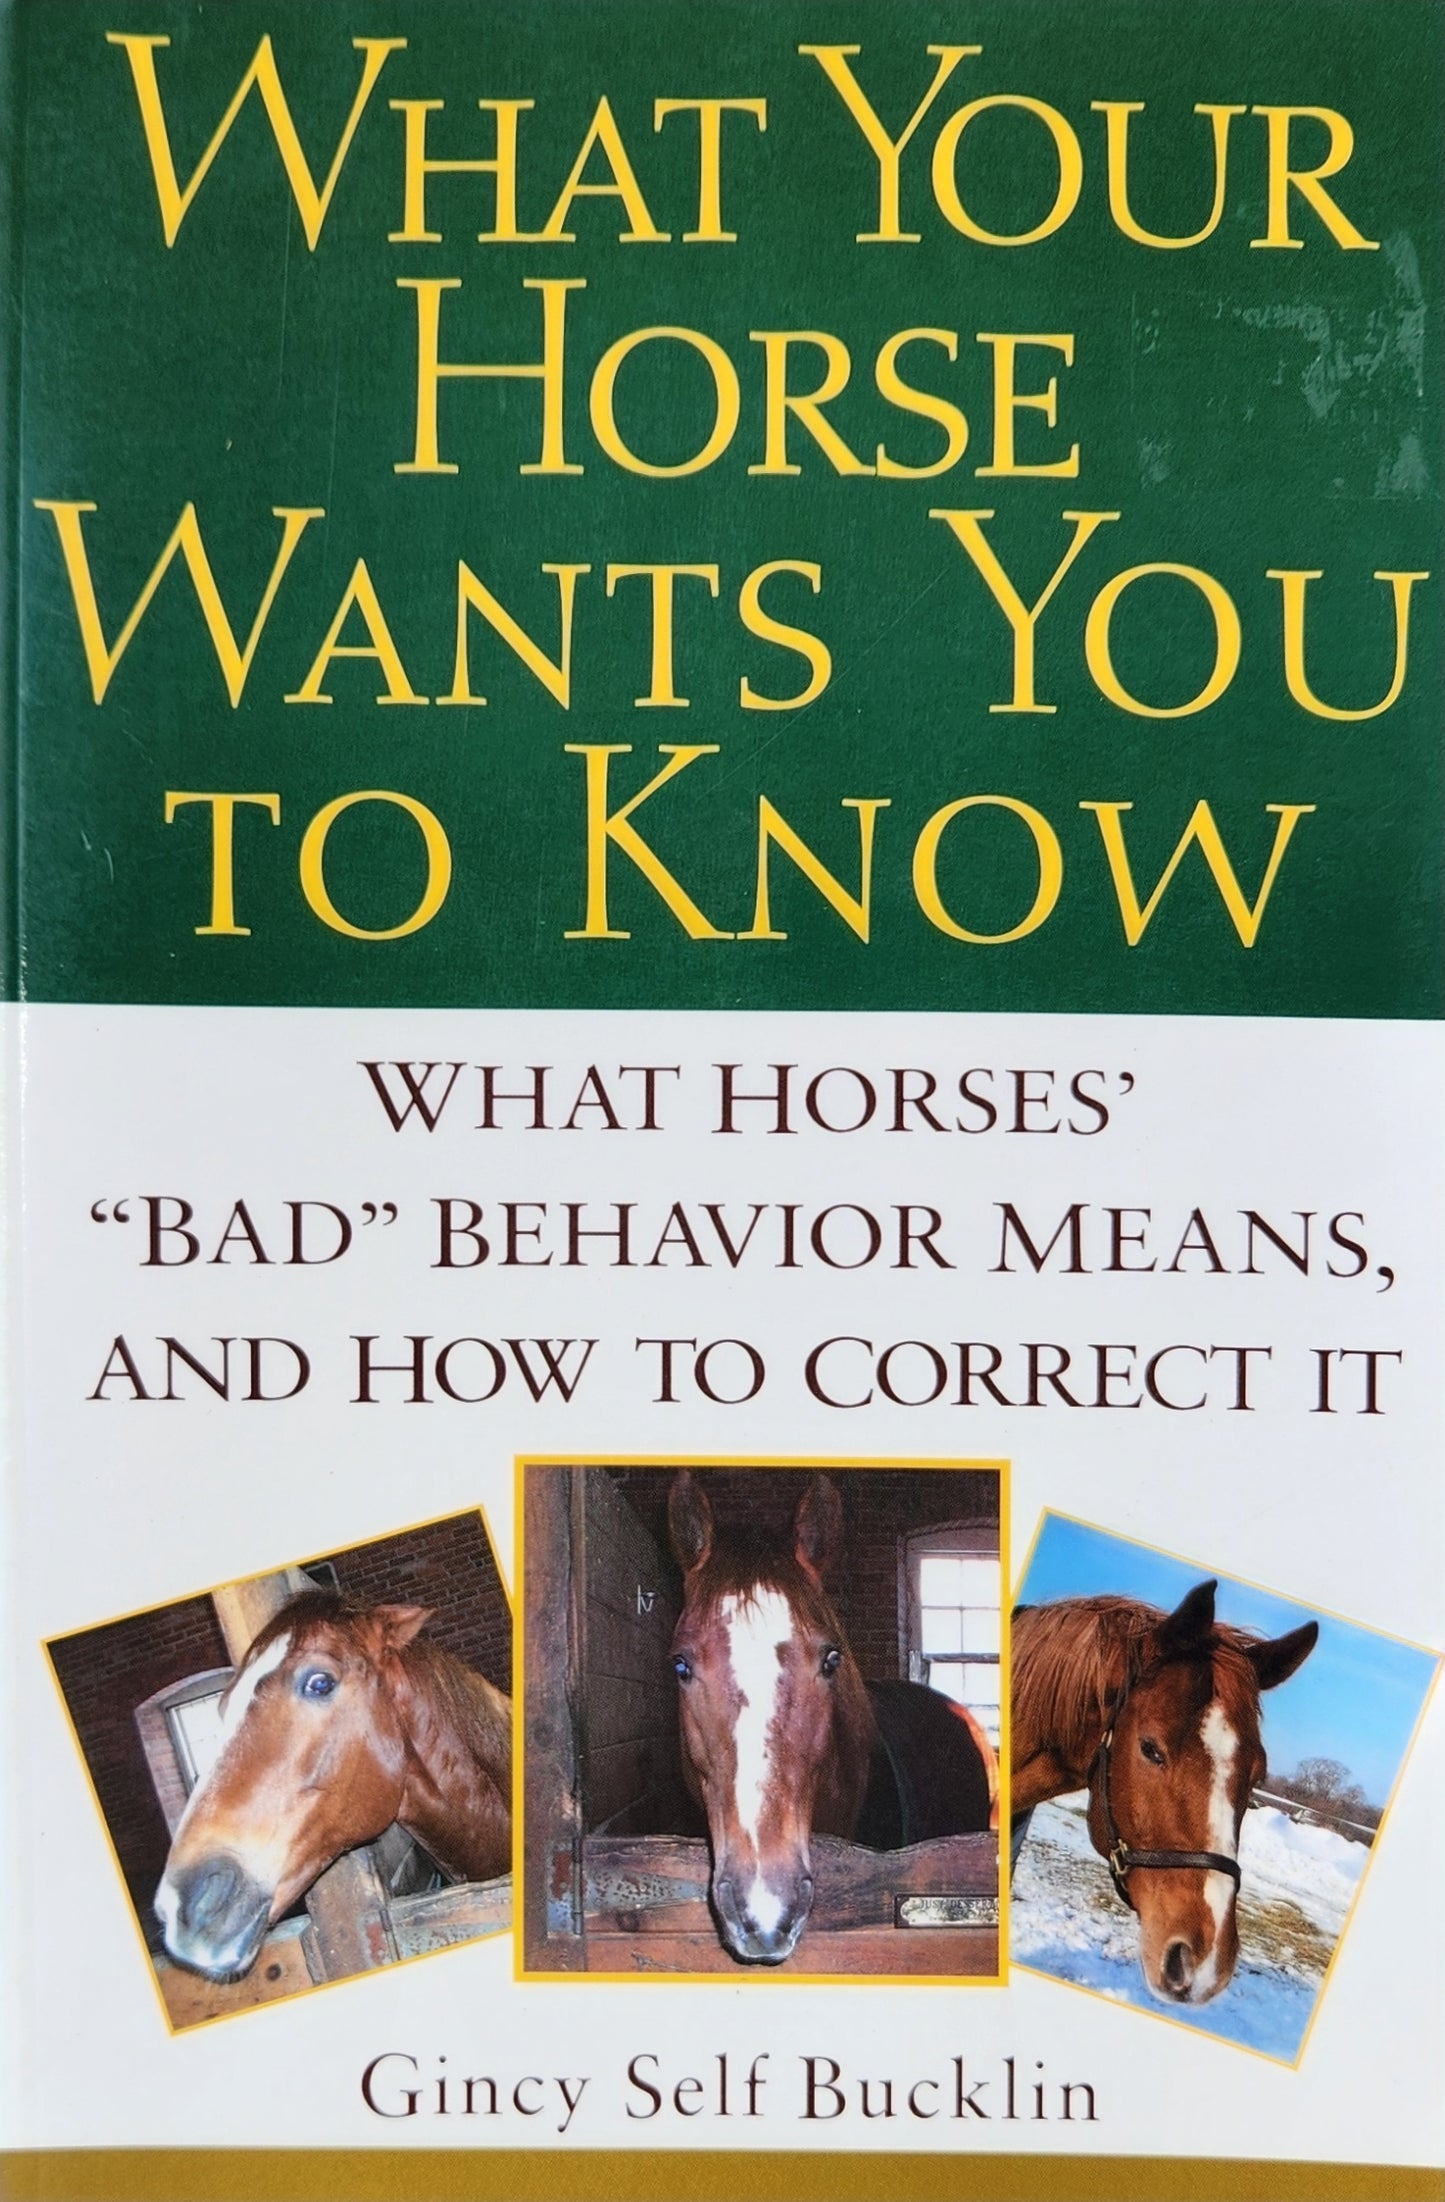 What Your Horse Wants You To Know